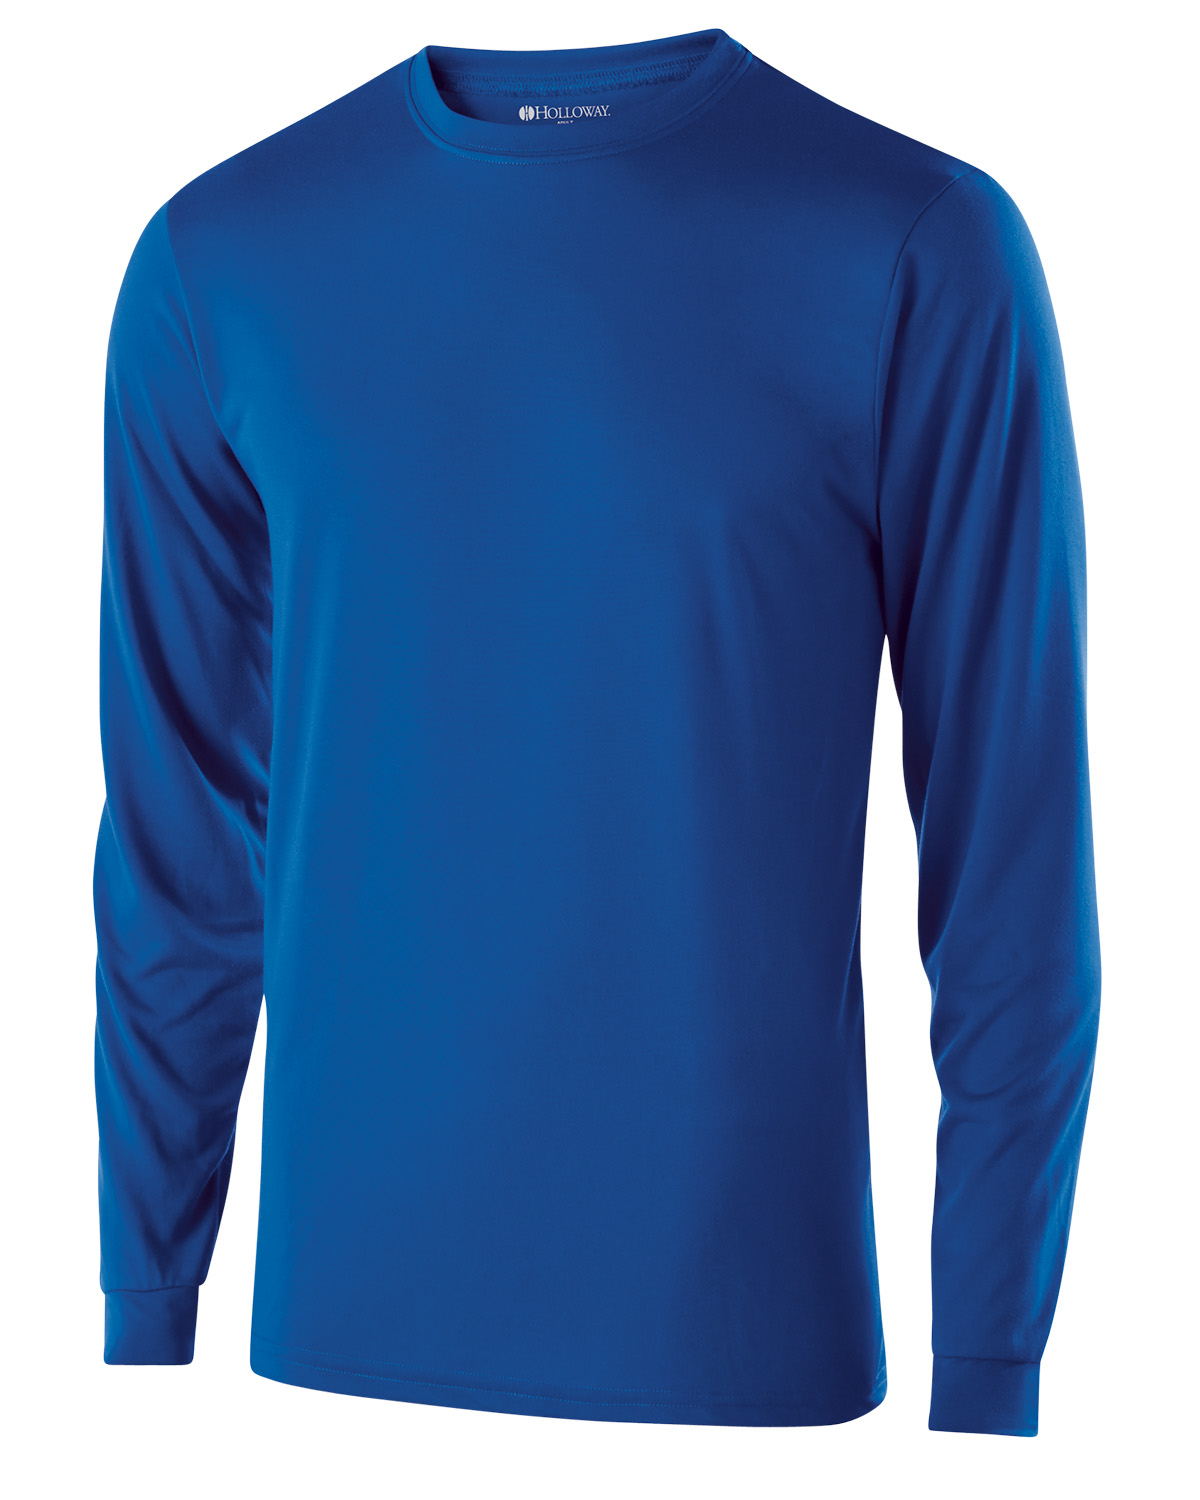 Holloway 222625 - Youth Polyester Long Sleeve Gauge Shirt $10.58